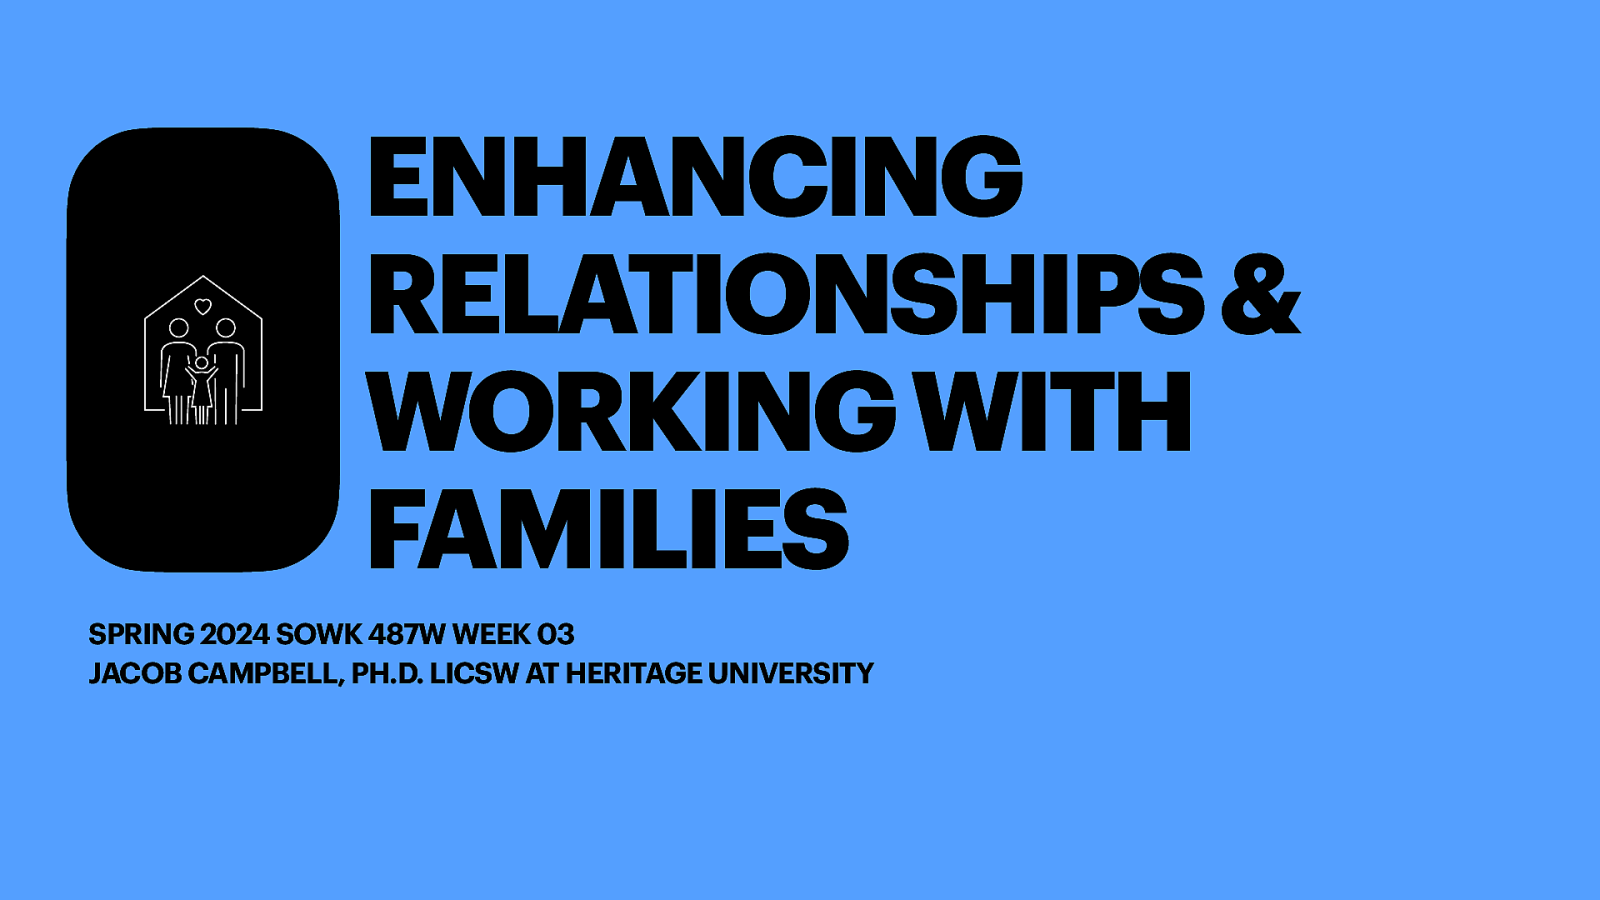 Spring 2024 SOWK 487w Week 03 - Enhancing Relationships and Working with Families